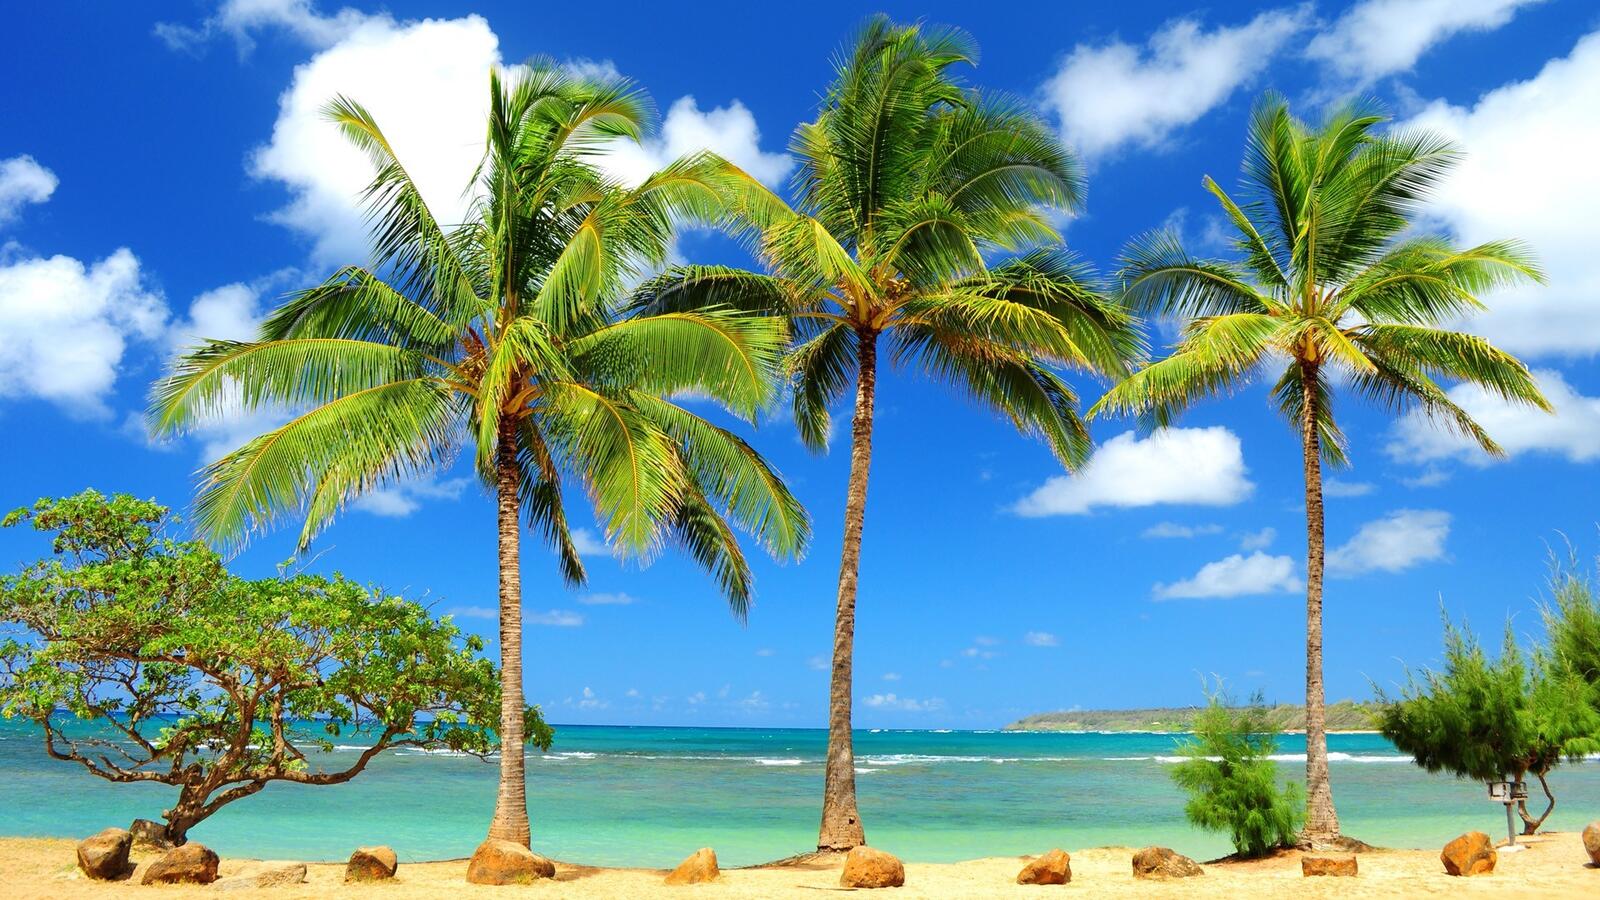 Wallpapers palm trees landscapes beach on the desktop